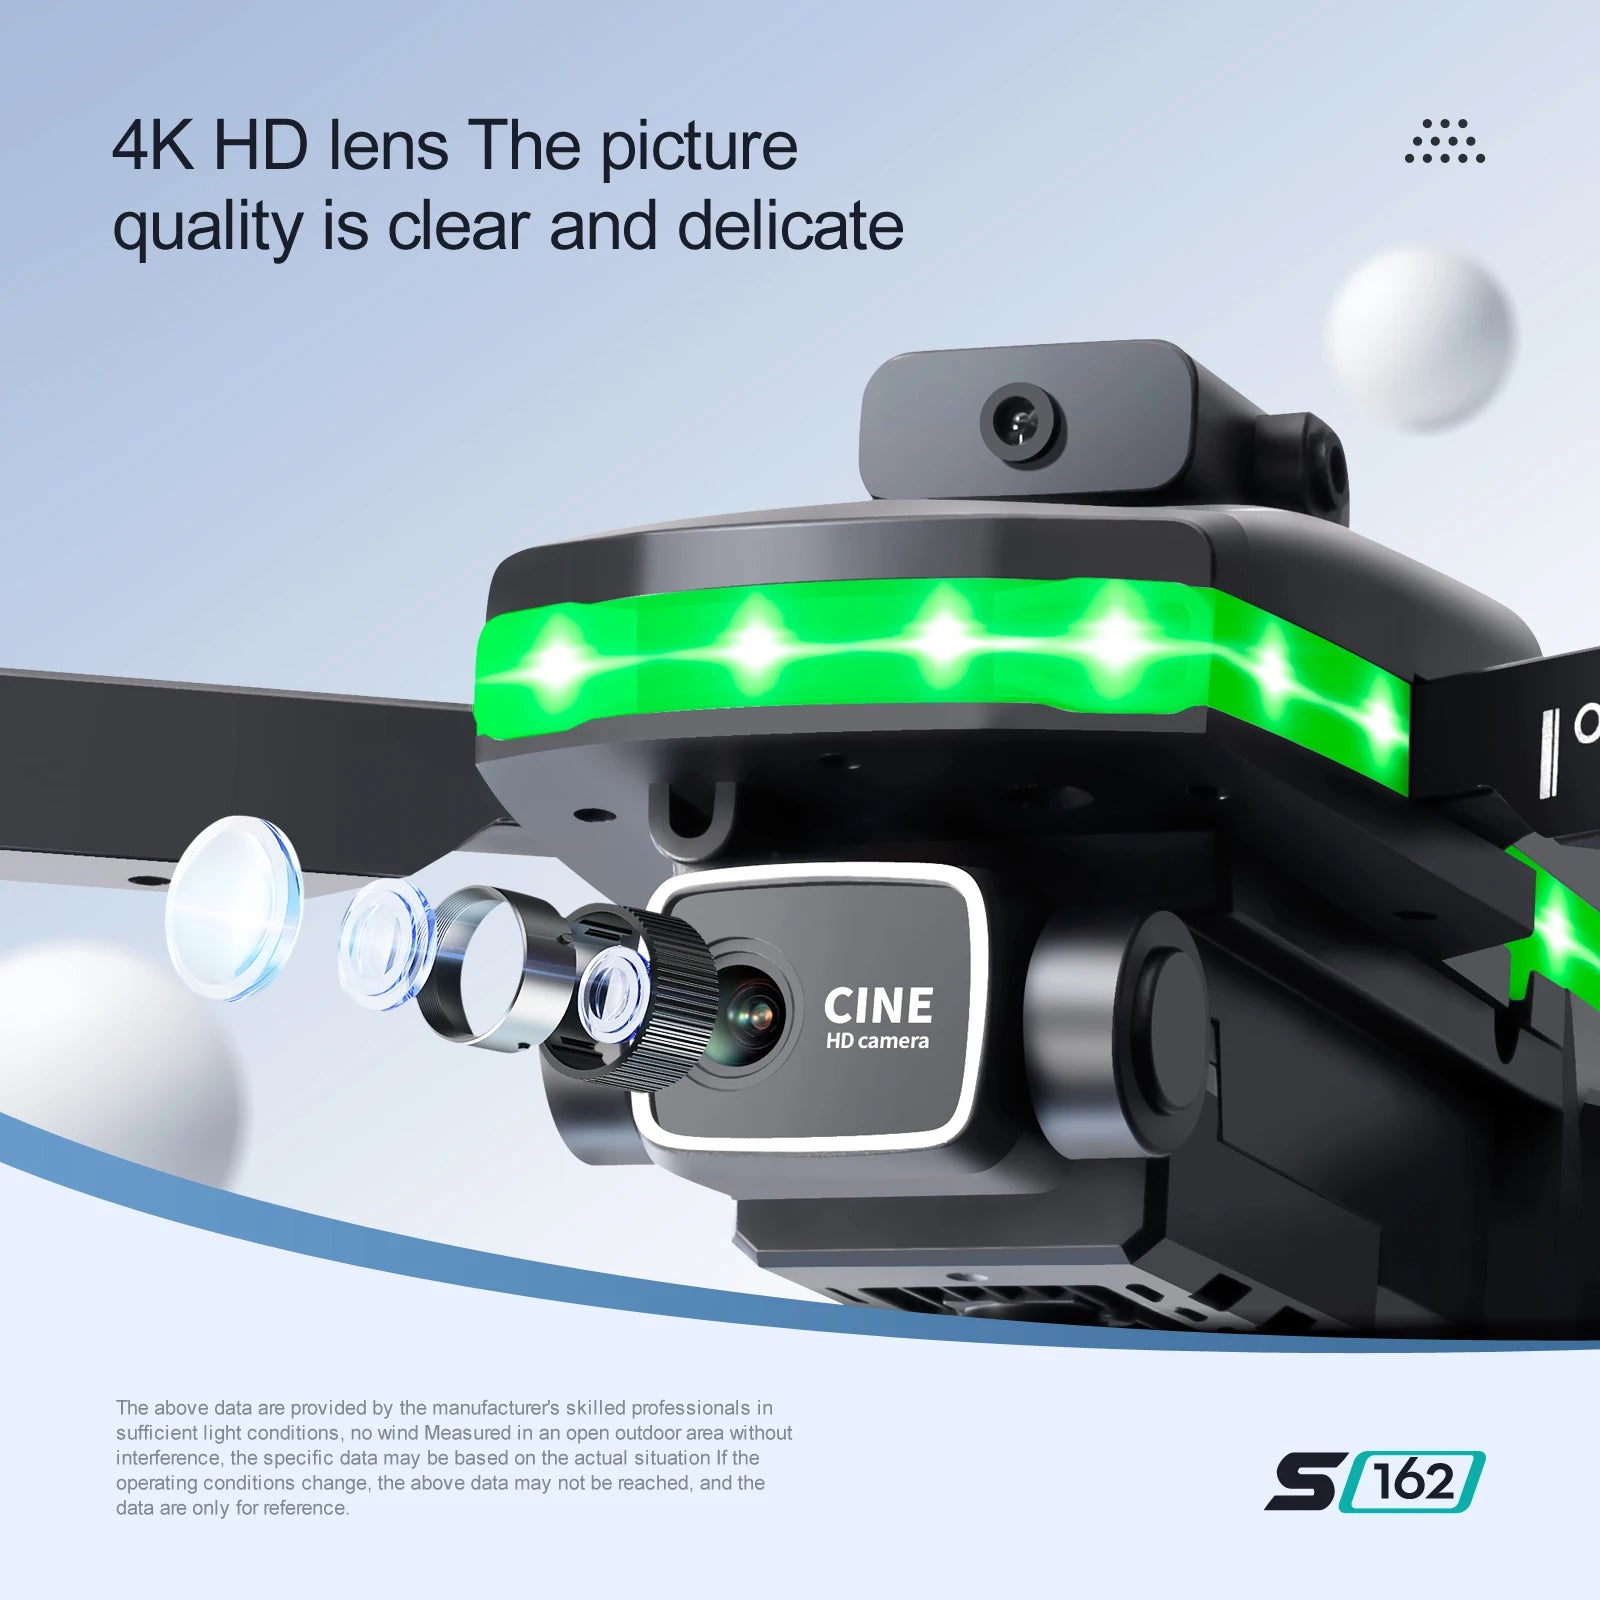 S162 Pro Drone, the above data are provided by the manufacturers skilled professionals in sufficient light conditions